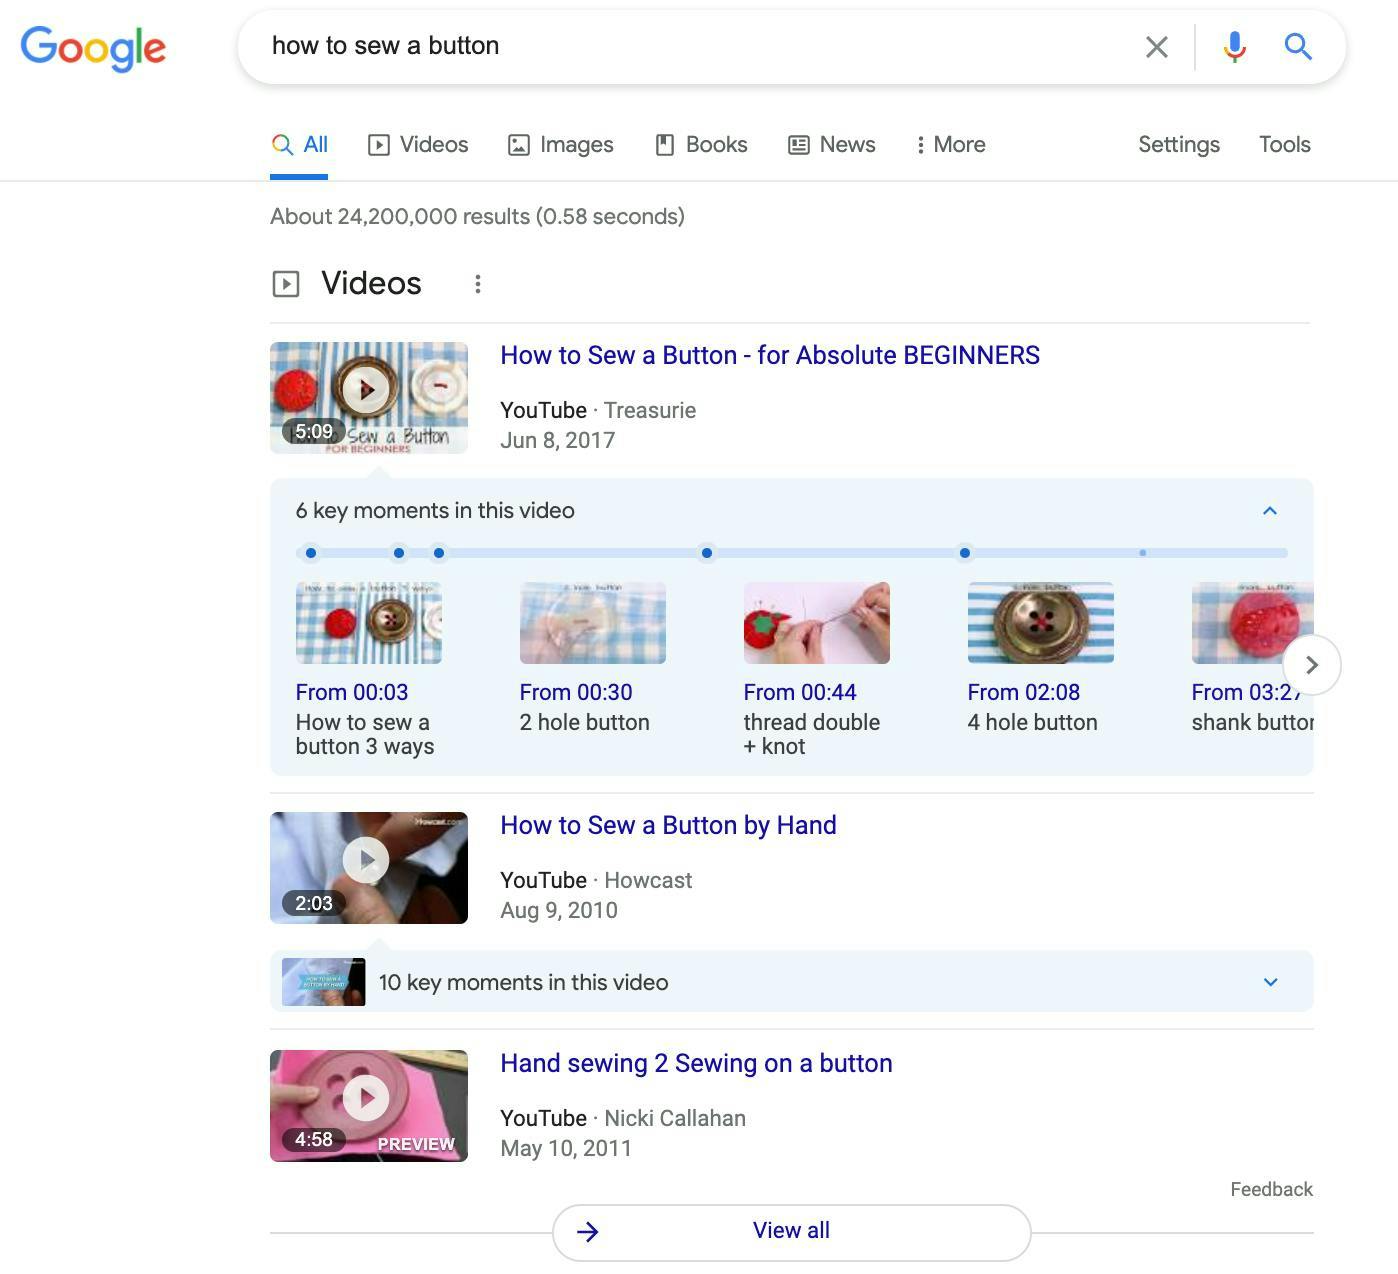 Google search results for How to Sew a Button showcasing timestamp suggestions by Google for YouTube video results